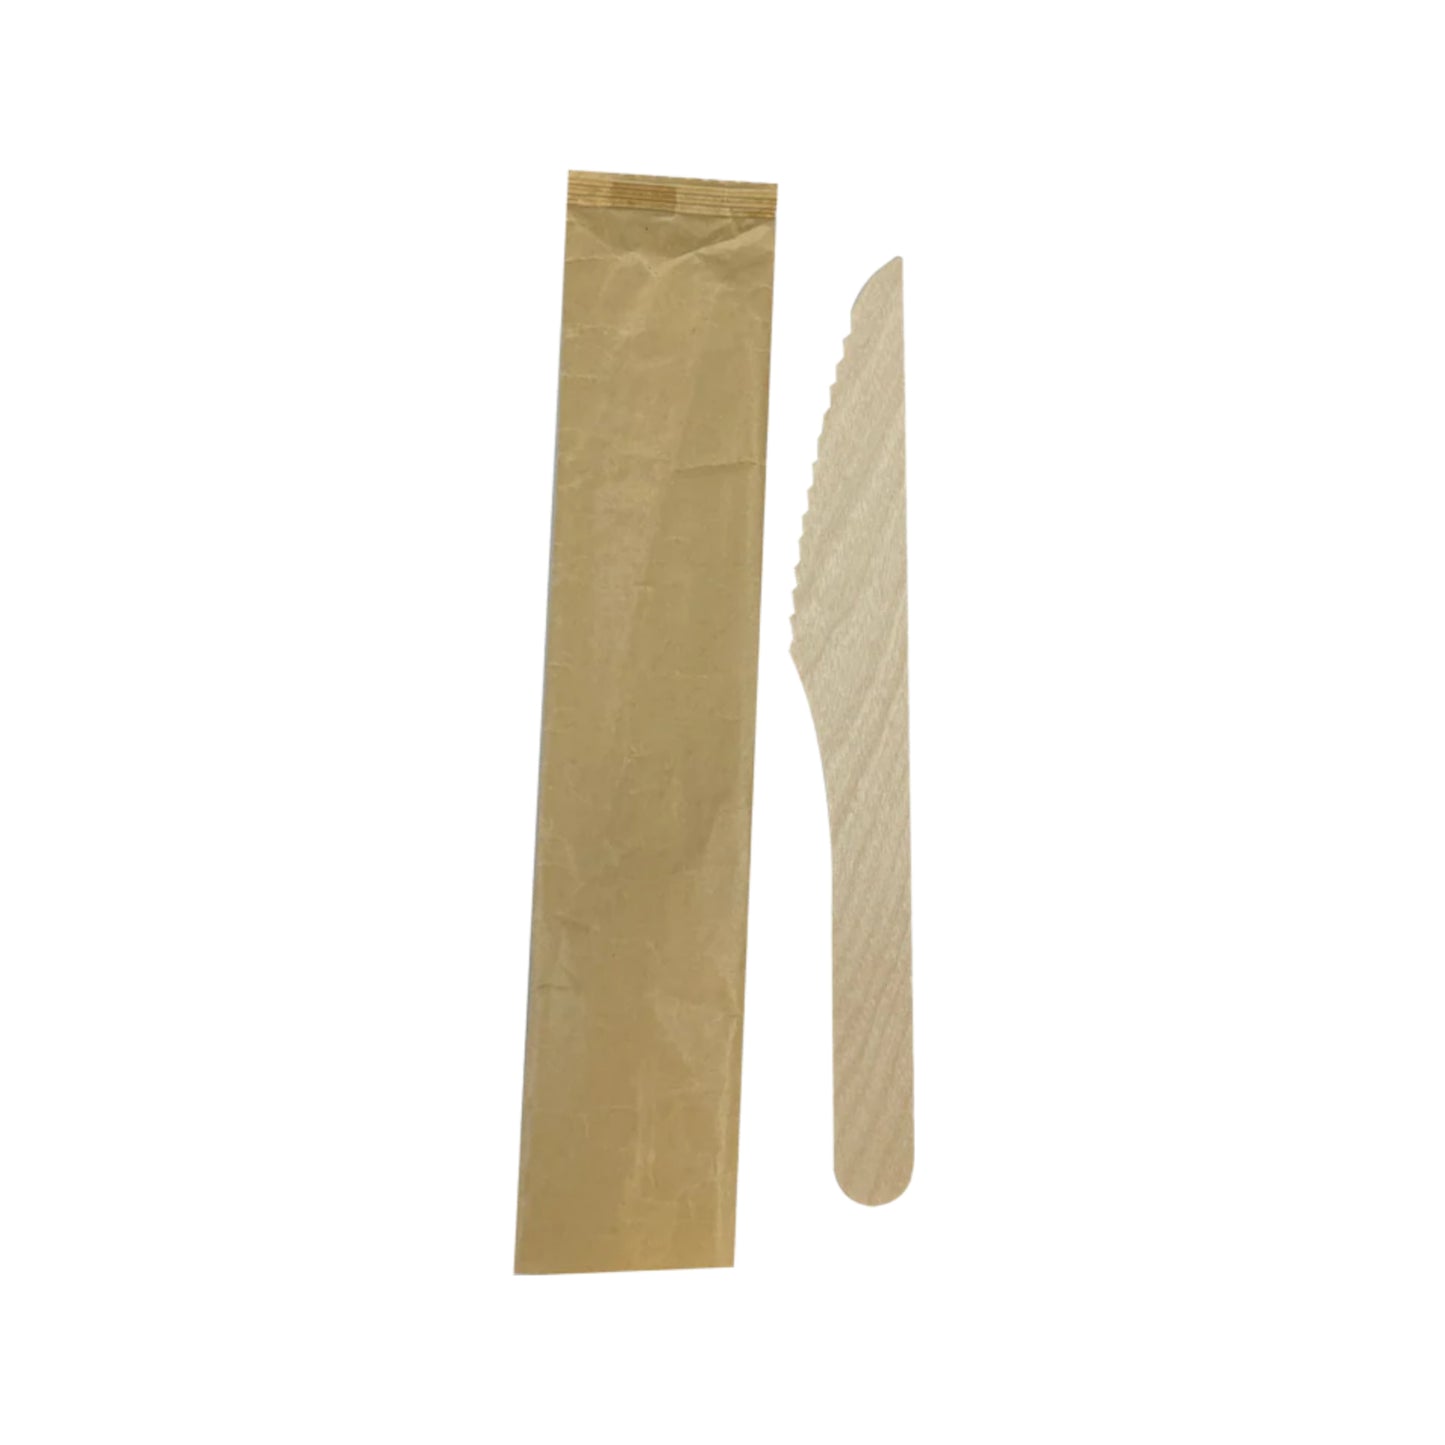 KIS-IR165KG | Wooden Knife with Paper Wrapped; $0.037/pc